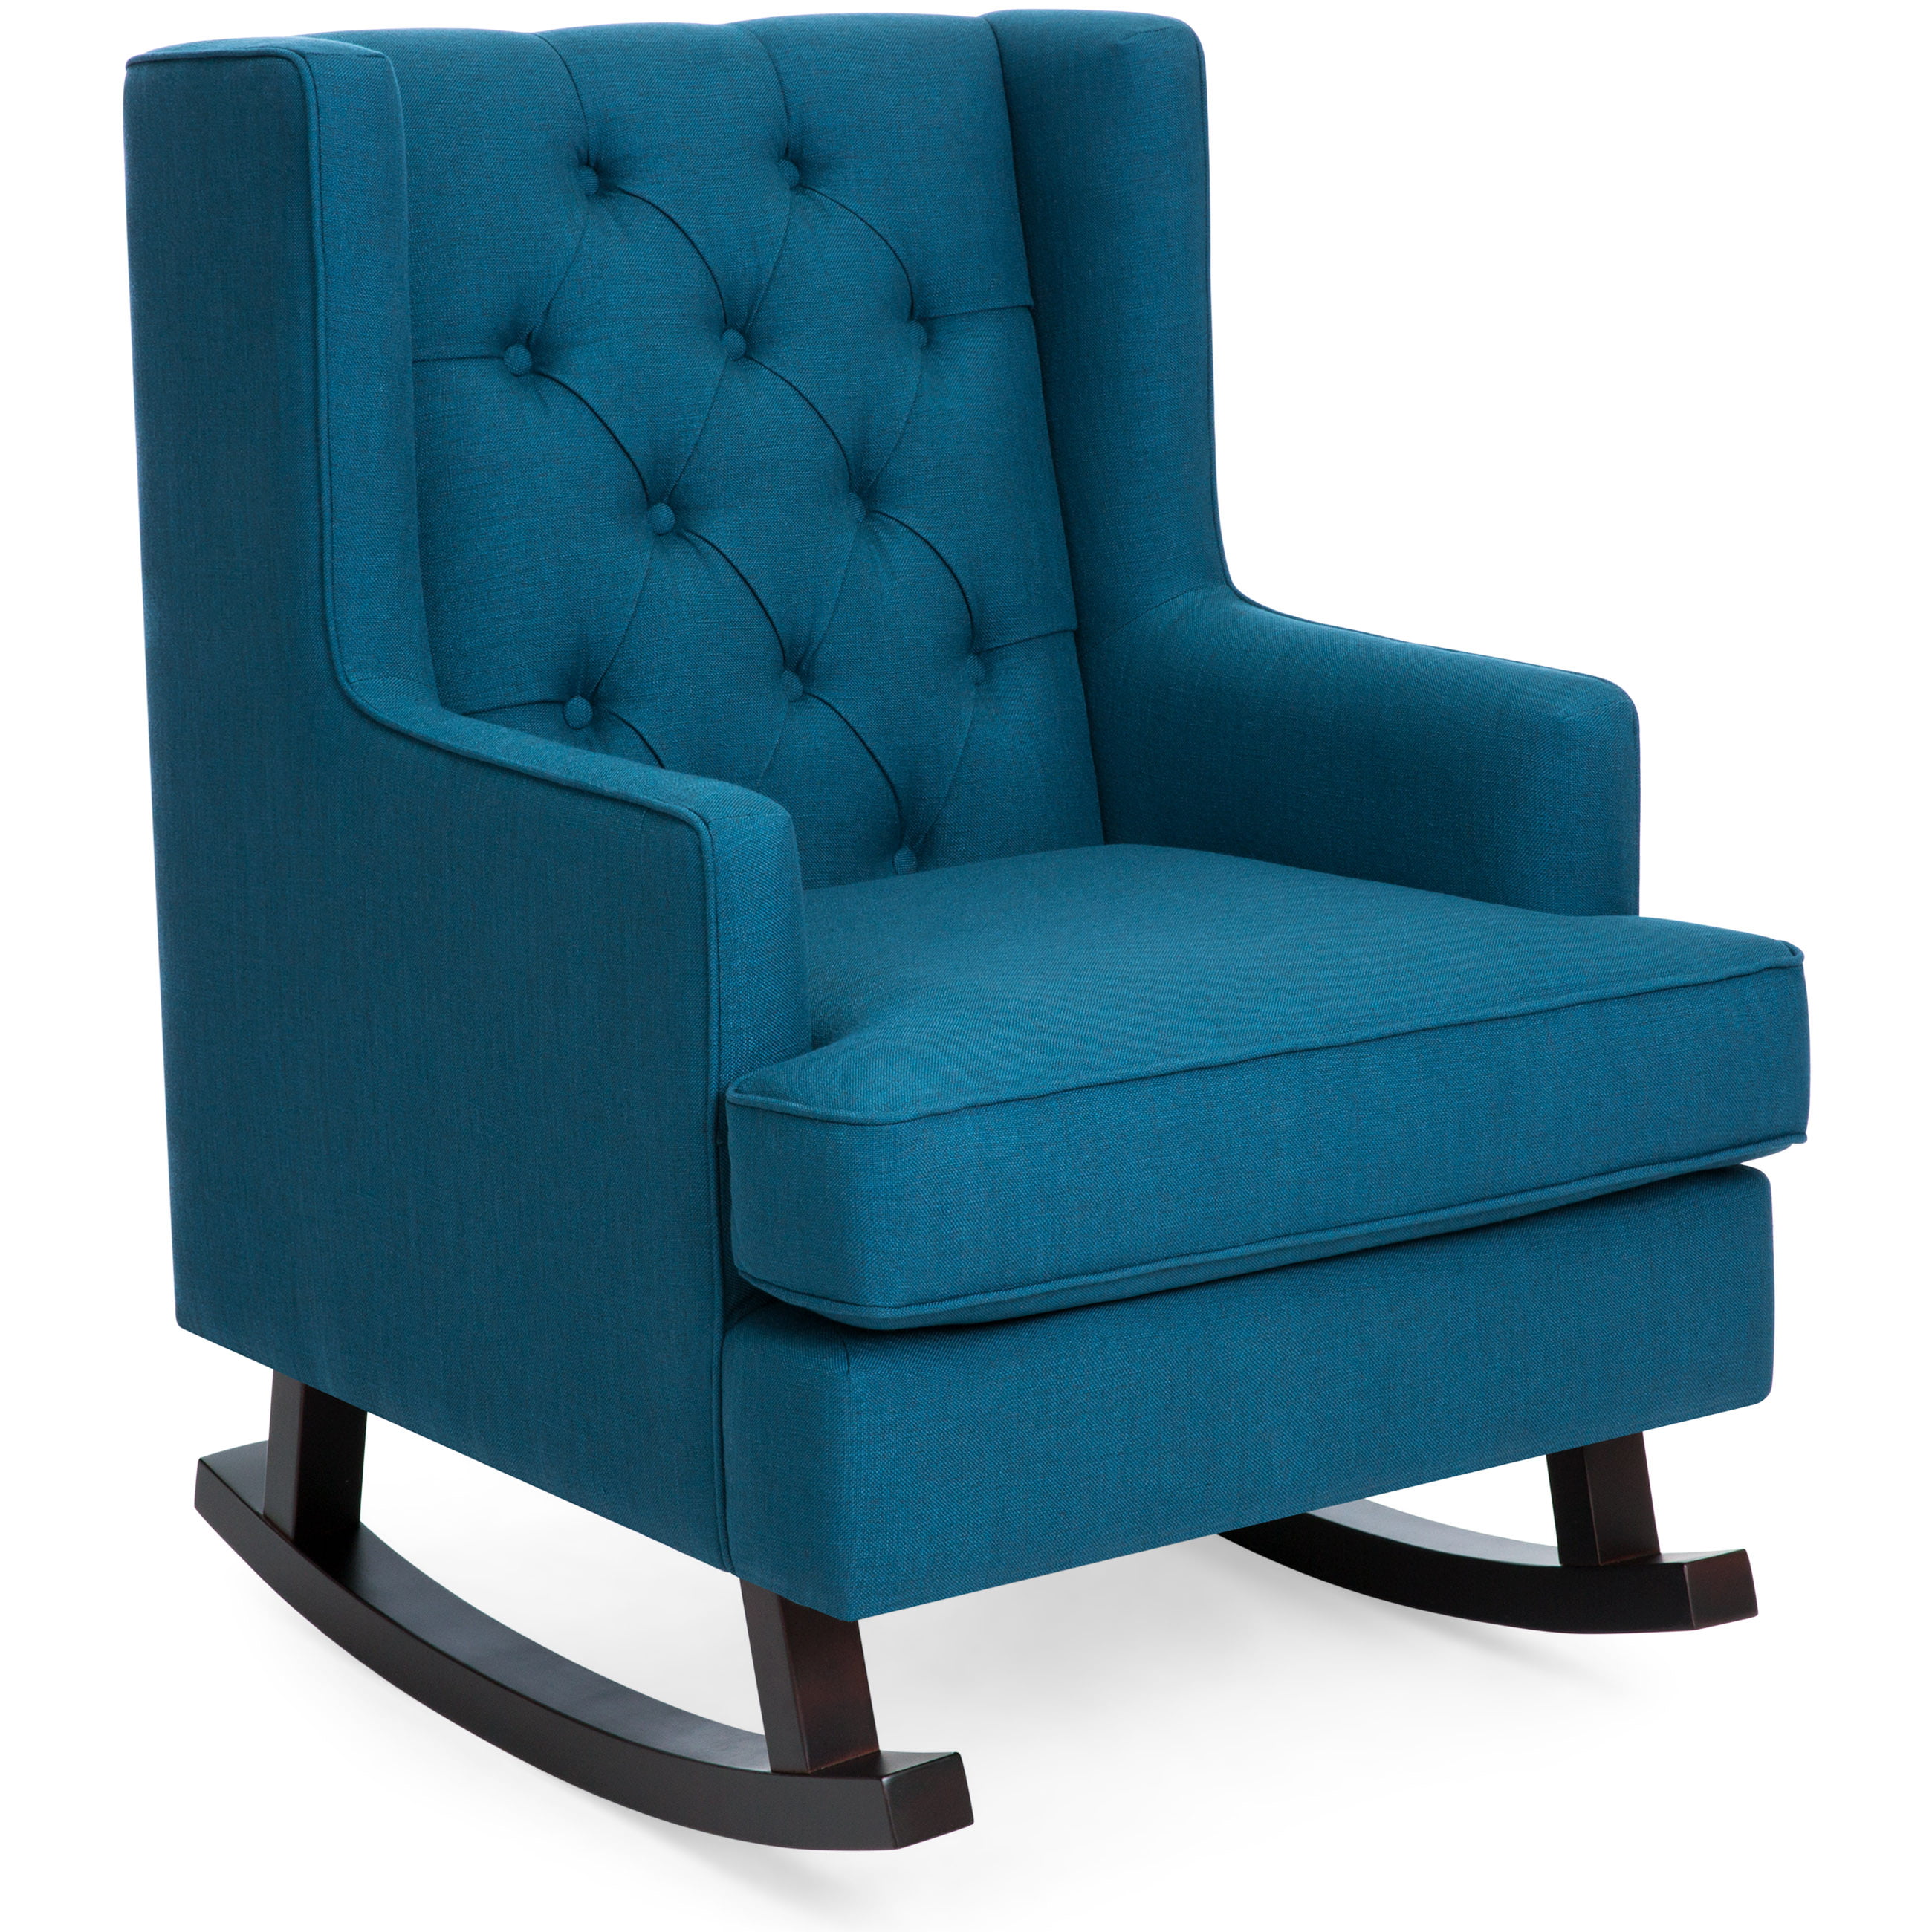 Best Choice Products Tufted Upholstered Wingback Rocking